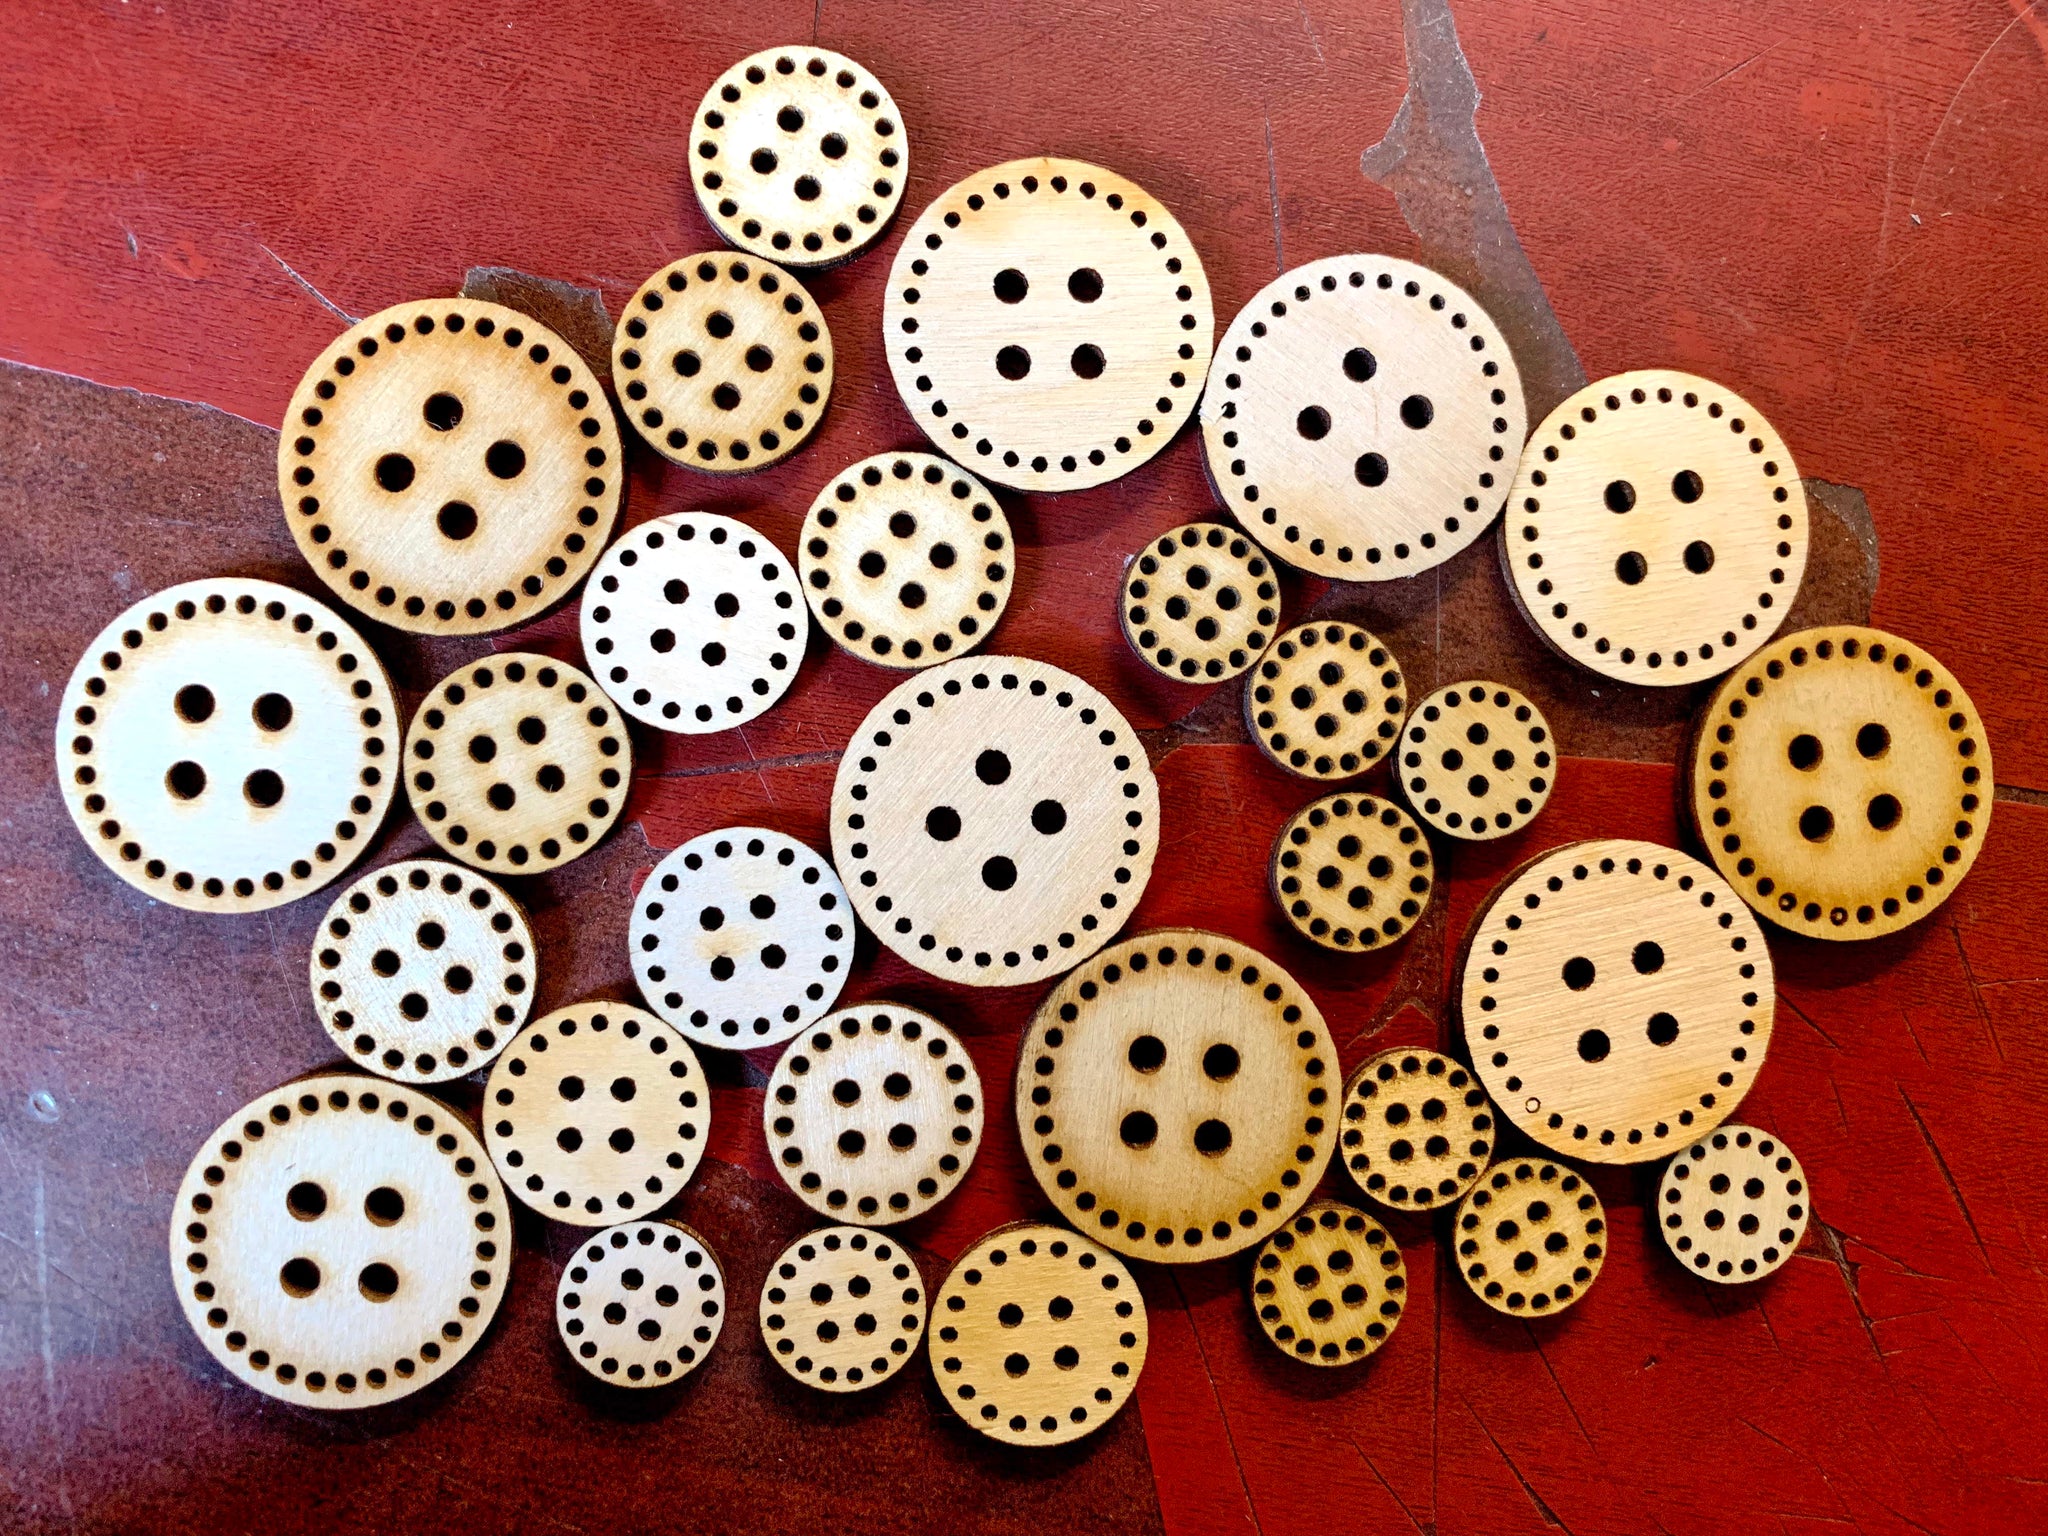 Oblong Wooden Buttons - 30 mm (1.2 inches), Accessories